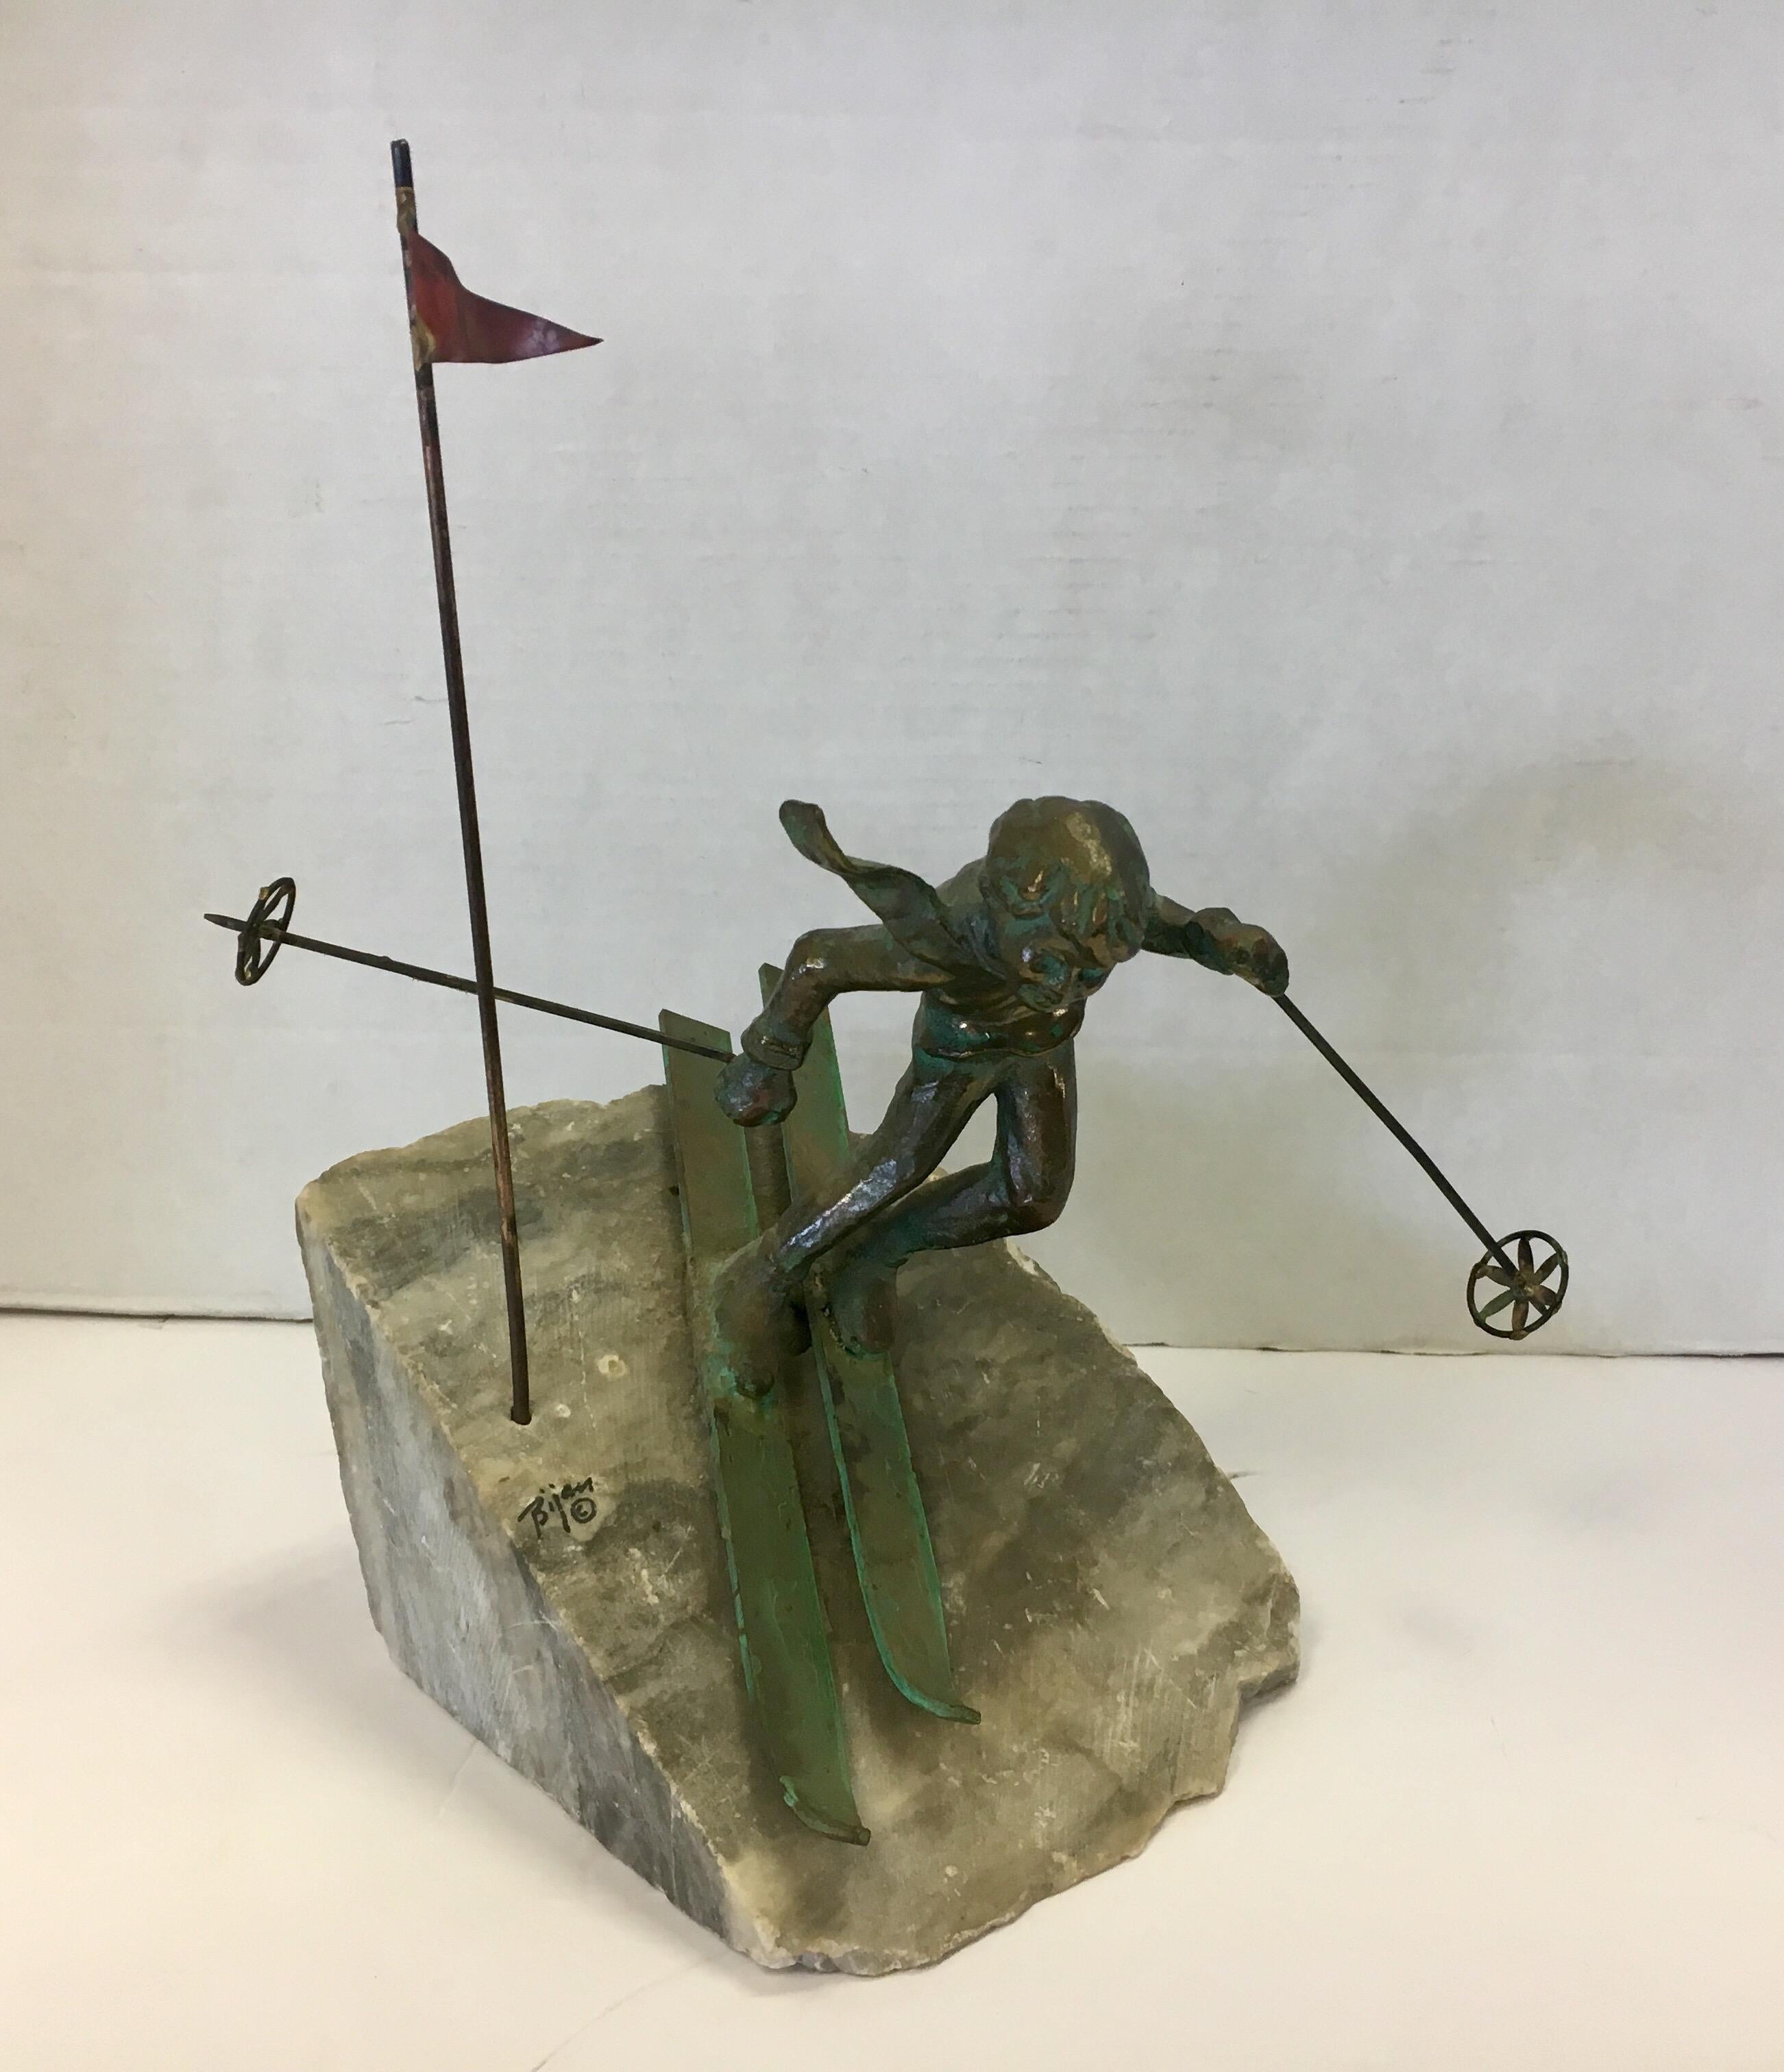 Brutalist signed brass Bijan table sculpture depicting a downhill ski racer maneuvering through a flagged gate. The sculpture sits on a heavy marble/stone base and is exceptional.